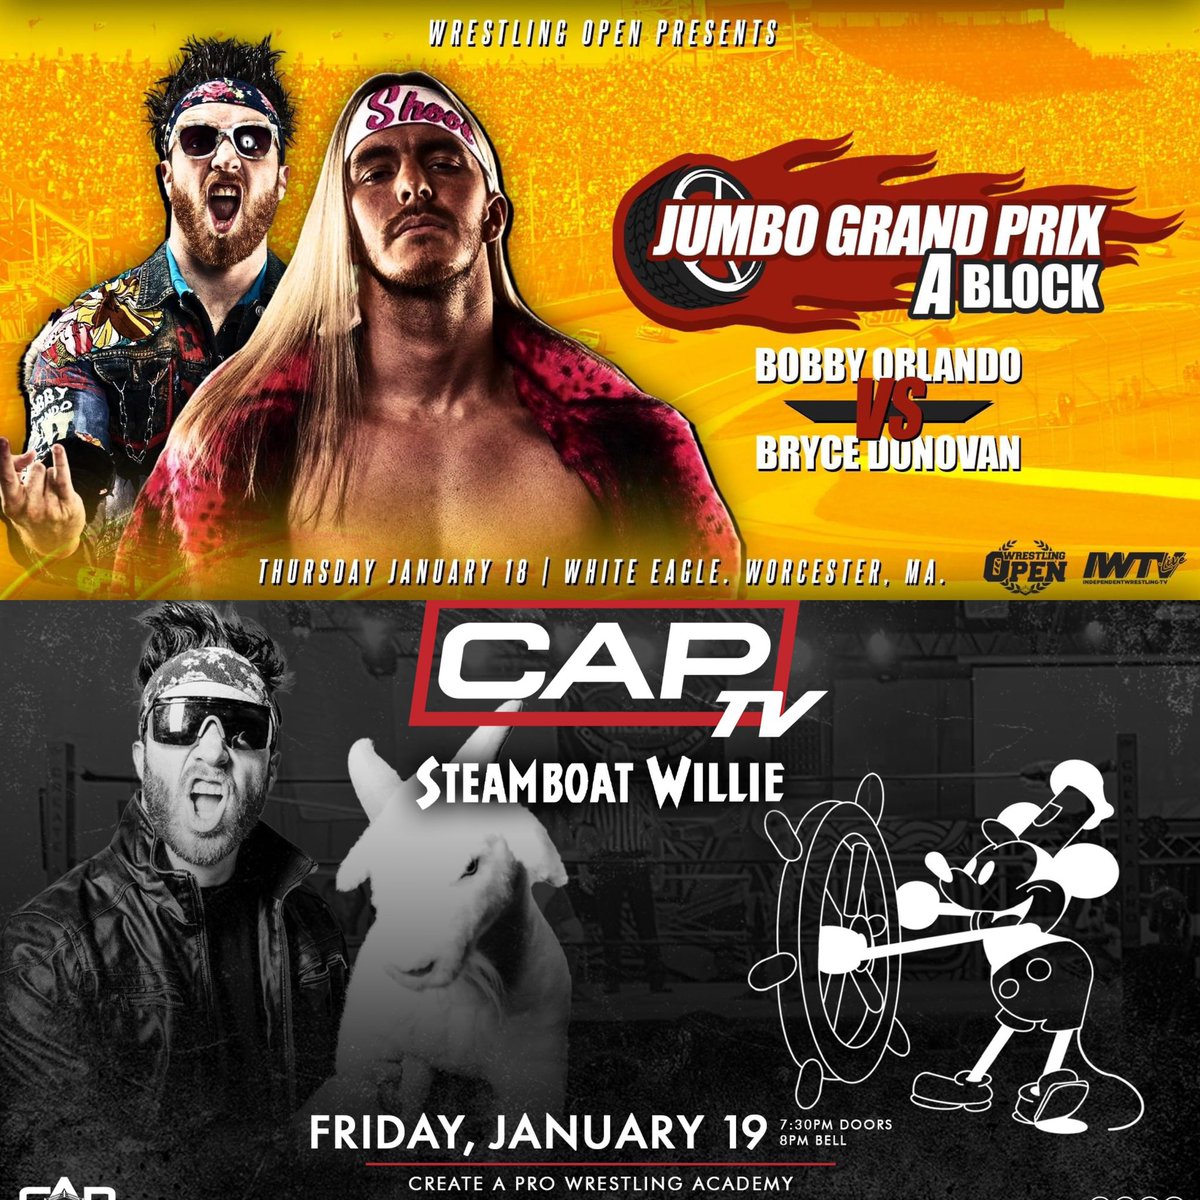 Shook Crew explodes for the first time at #WrestlingOpen tomorrow!

Friday #CAPTVLive returns to Hicksville, NY for #SteamboatWillie

Emotion filled weekend come through #BeShook